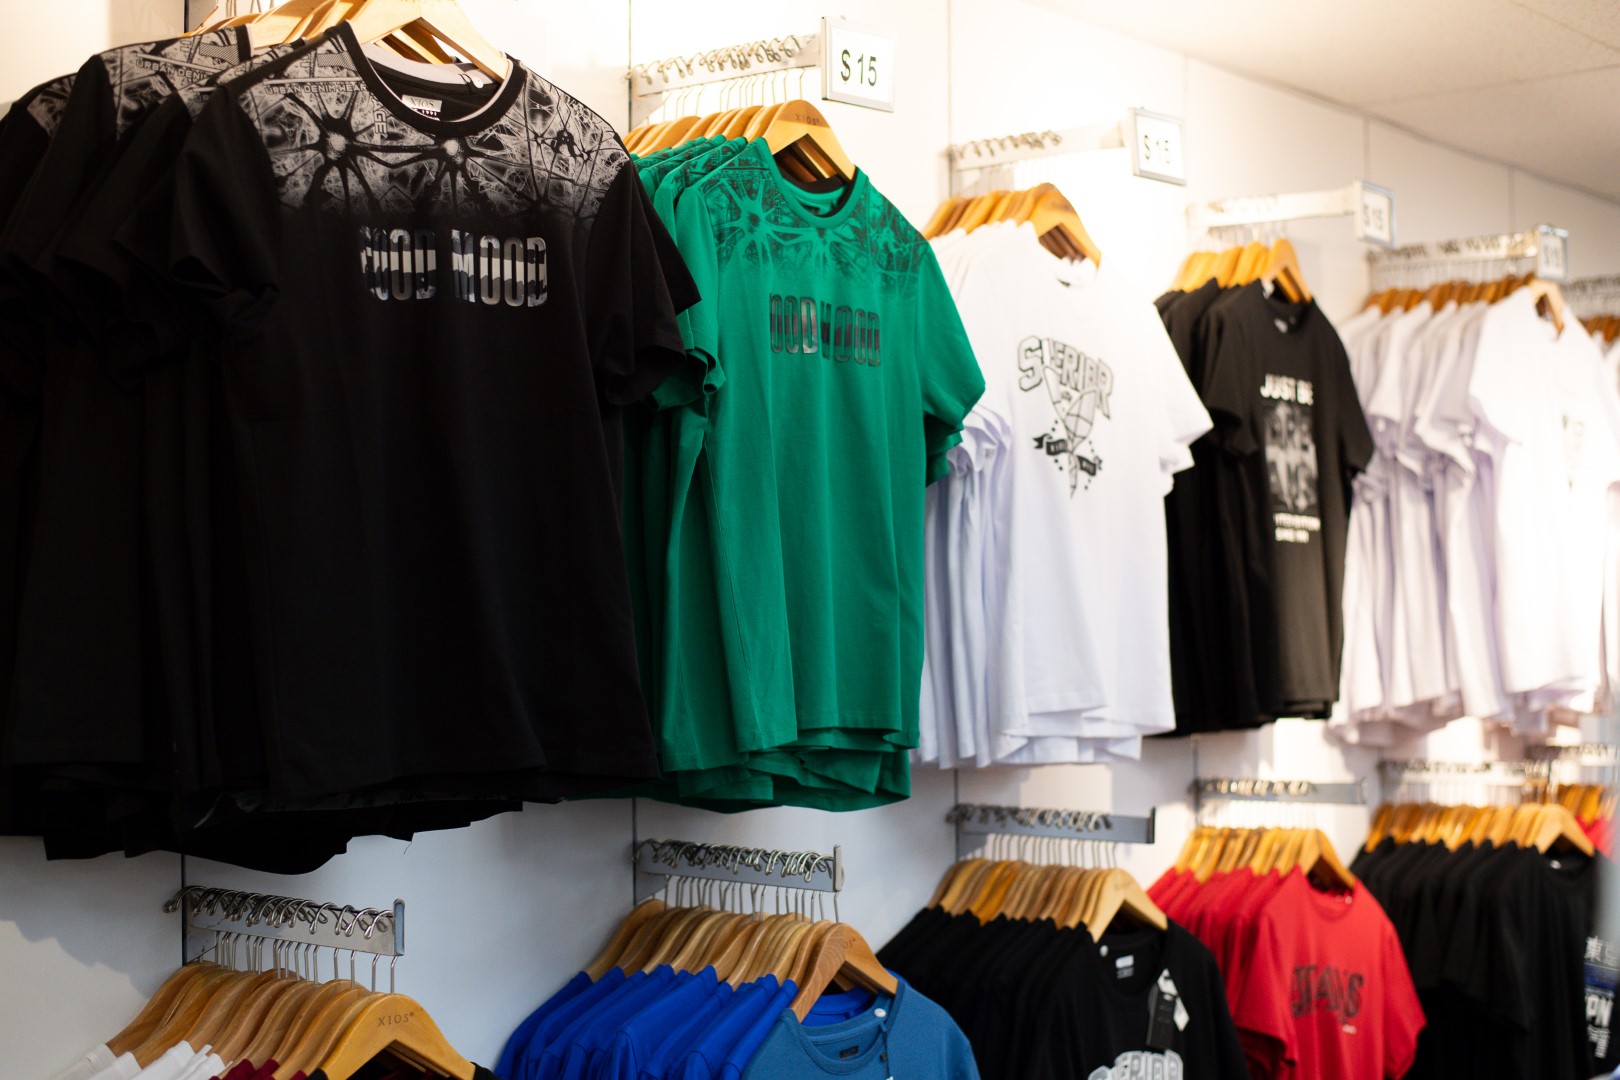 A variety of t-shirts displayed on wall-mounted racks in a store, featuring different colors and graphic designs, with price tags visible.